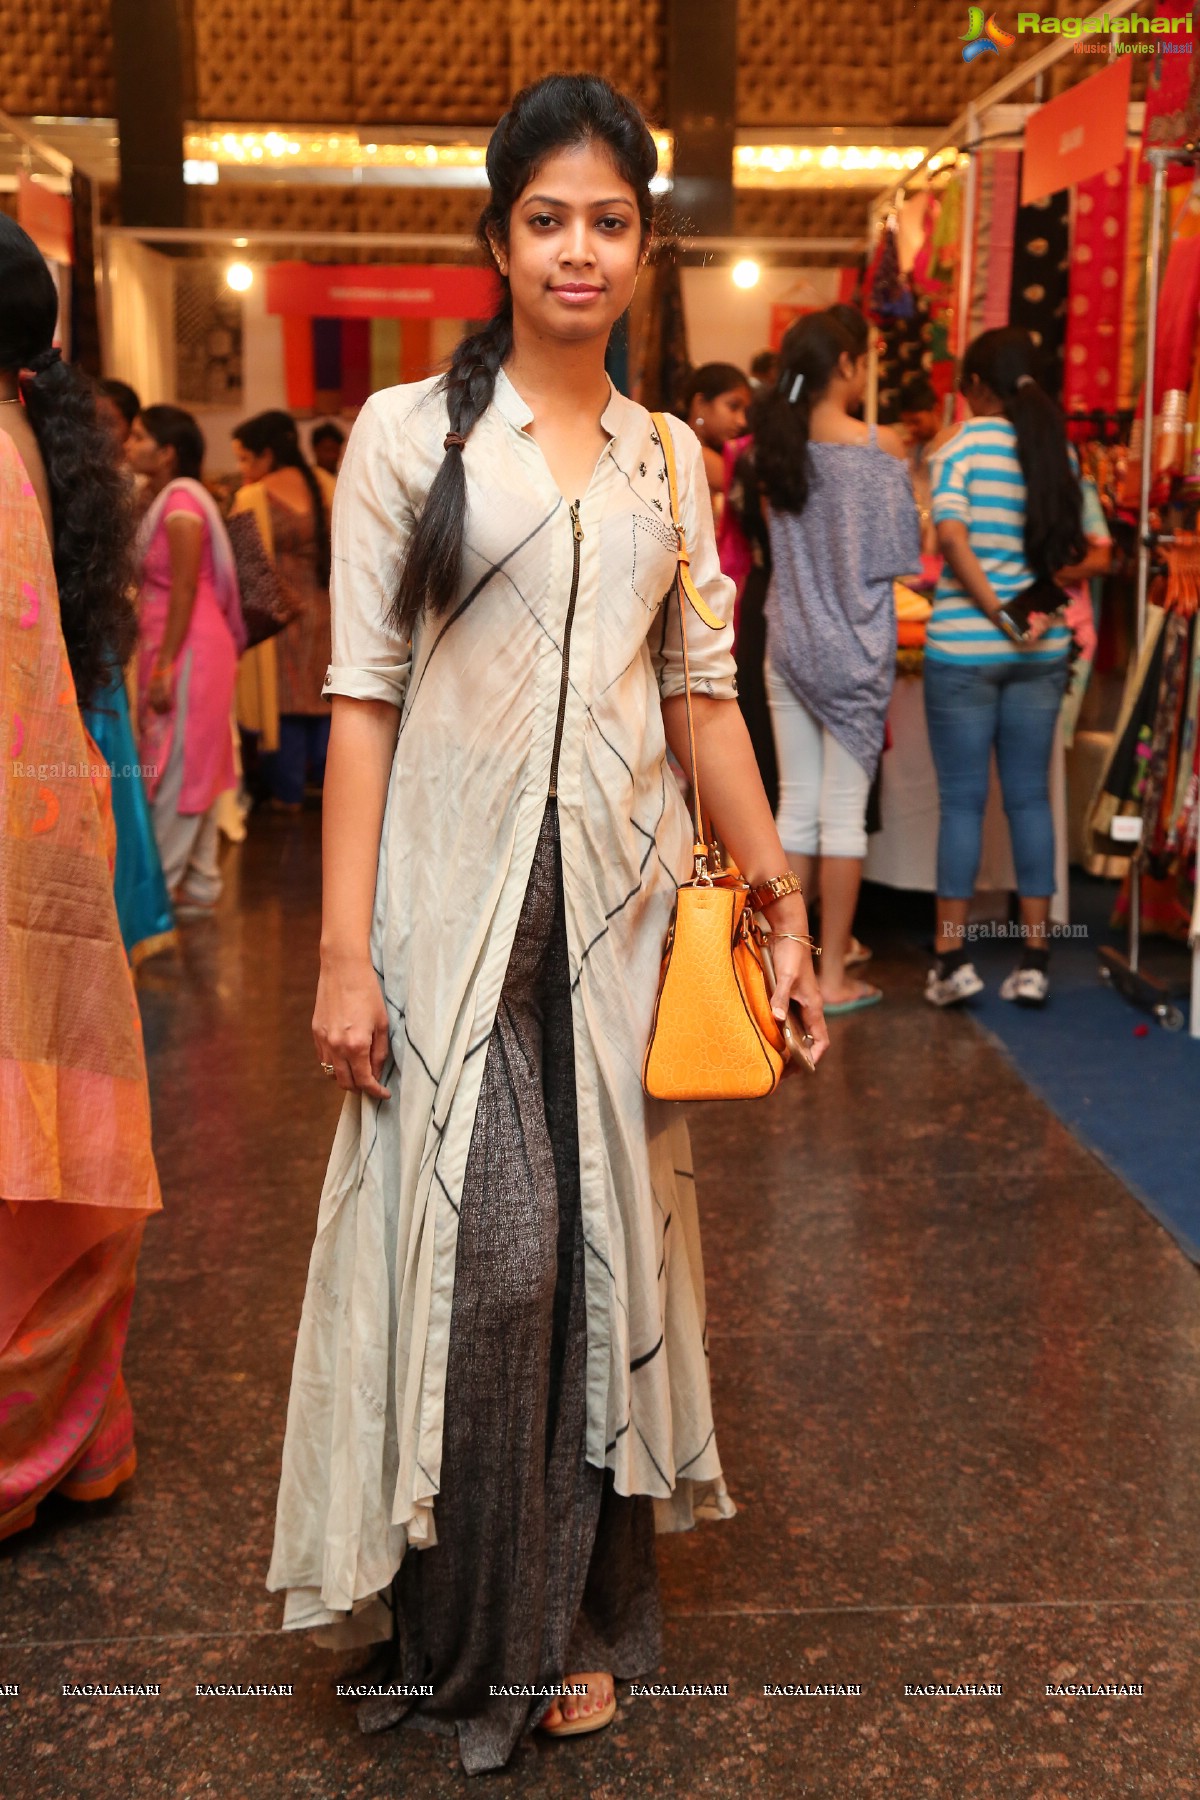 The South Indian Bride Exhibition at N Covention, Hyderabad